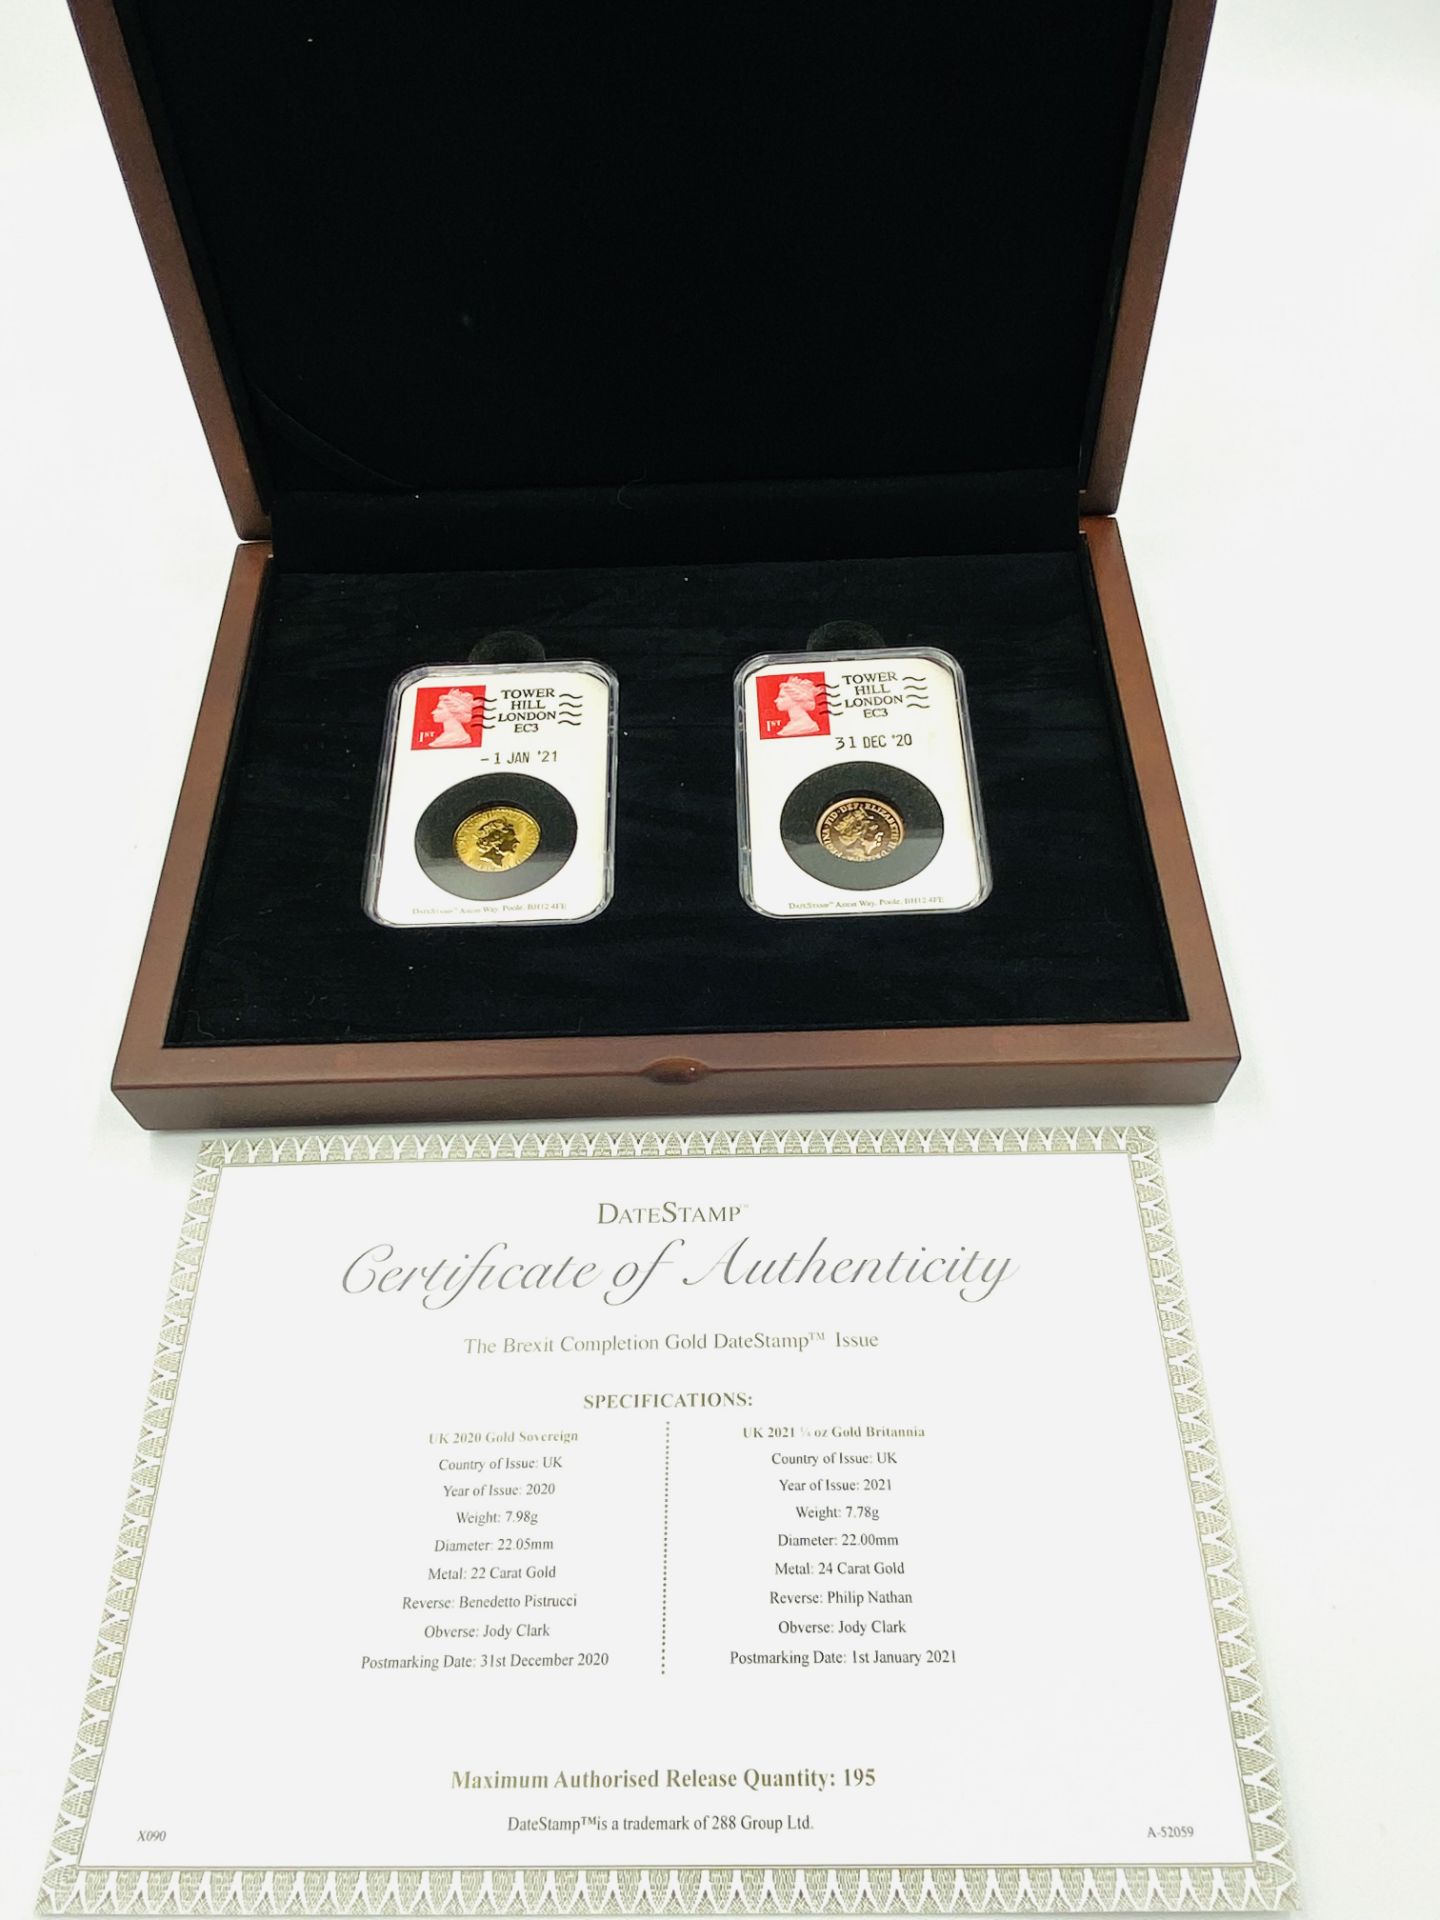 DateStamp Brexit Completion Issue, comprising 2020 gold sovereign and 2021 gold Britannia - Image 2 of 5